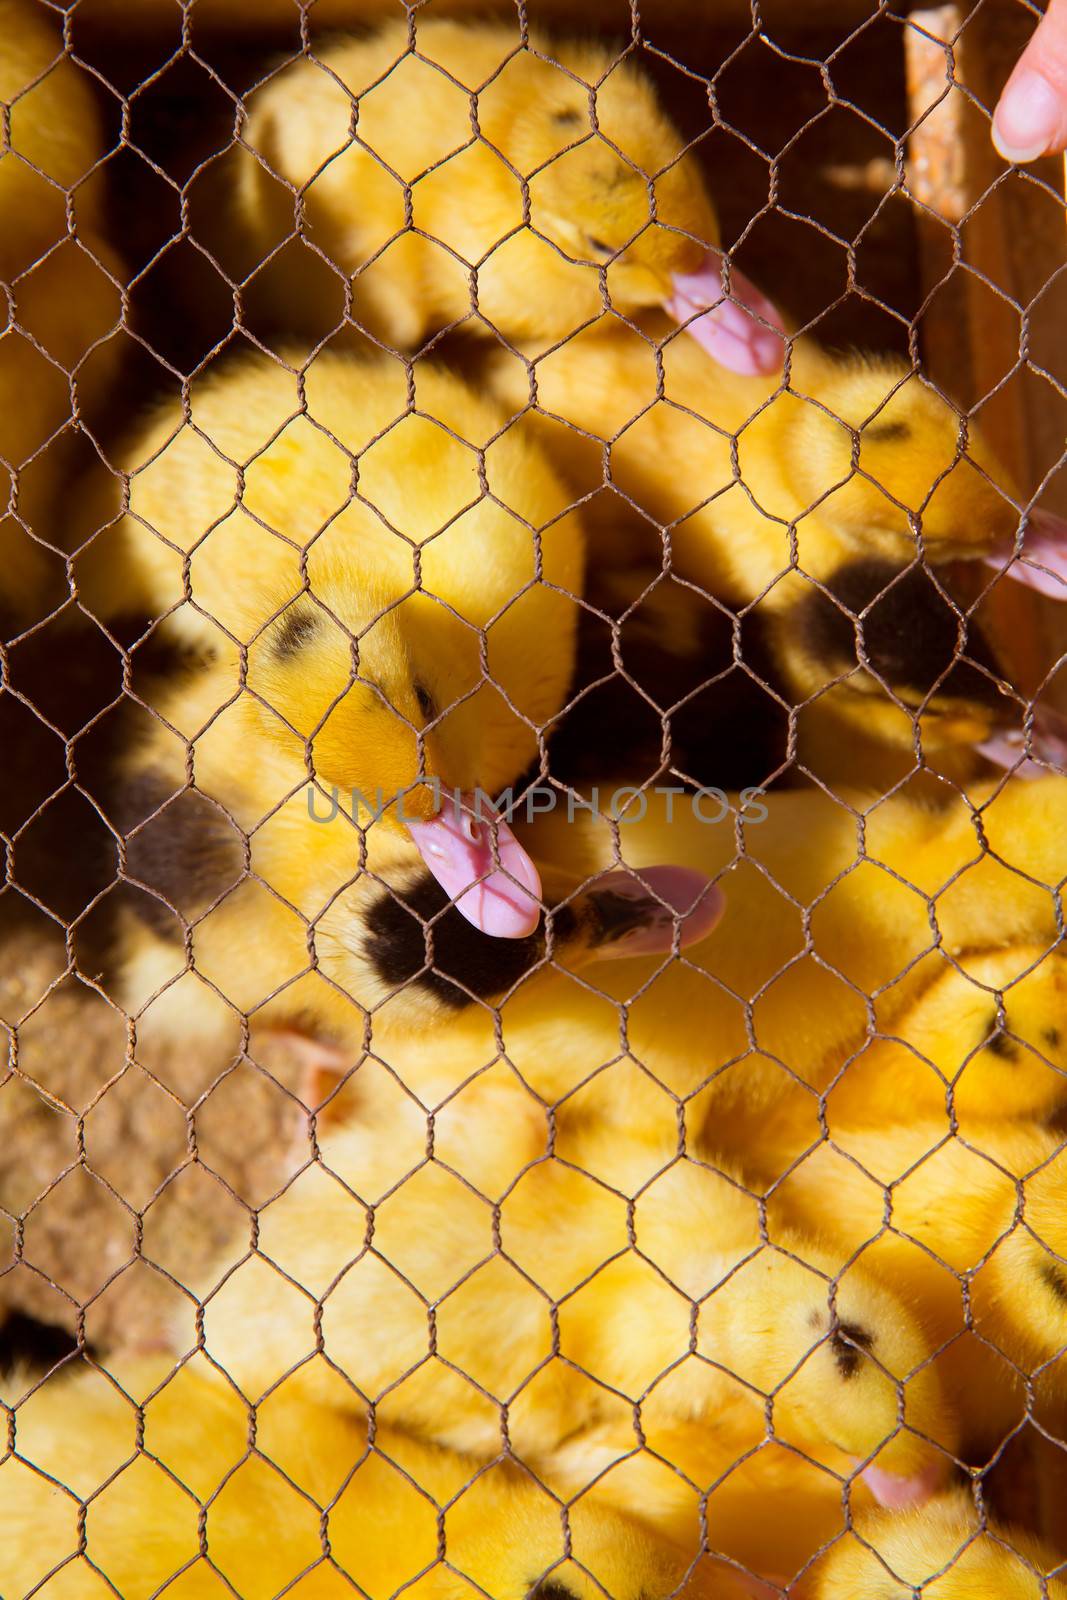 ducklings ducks in yellow and black under wire mesh at cattle fair